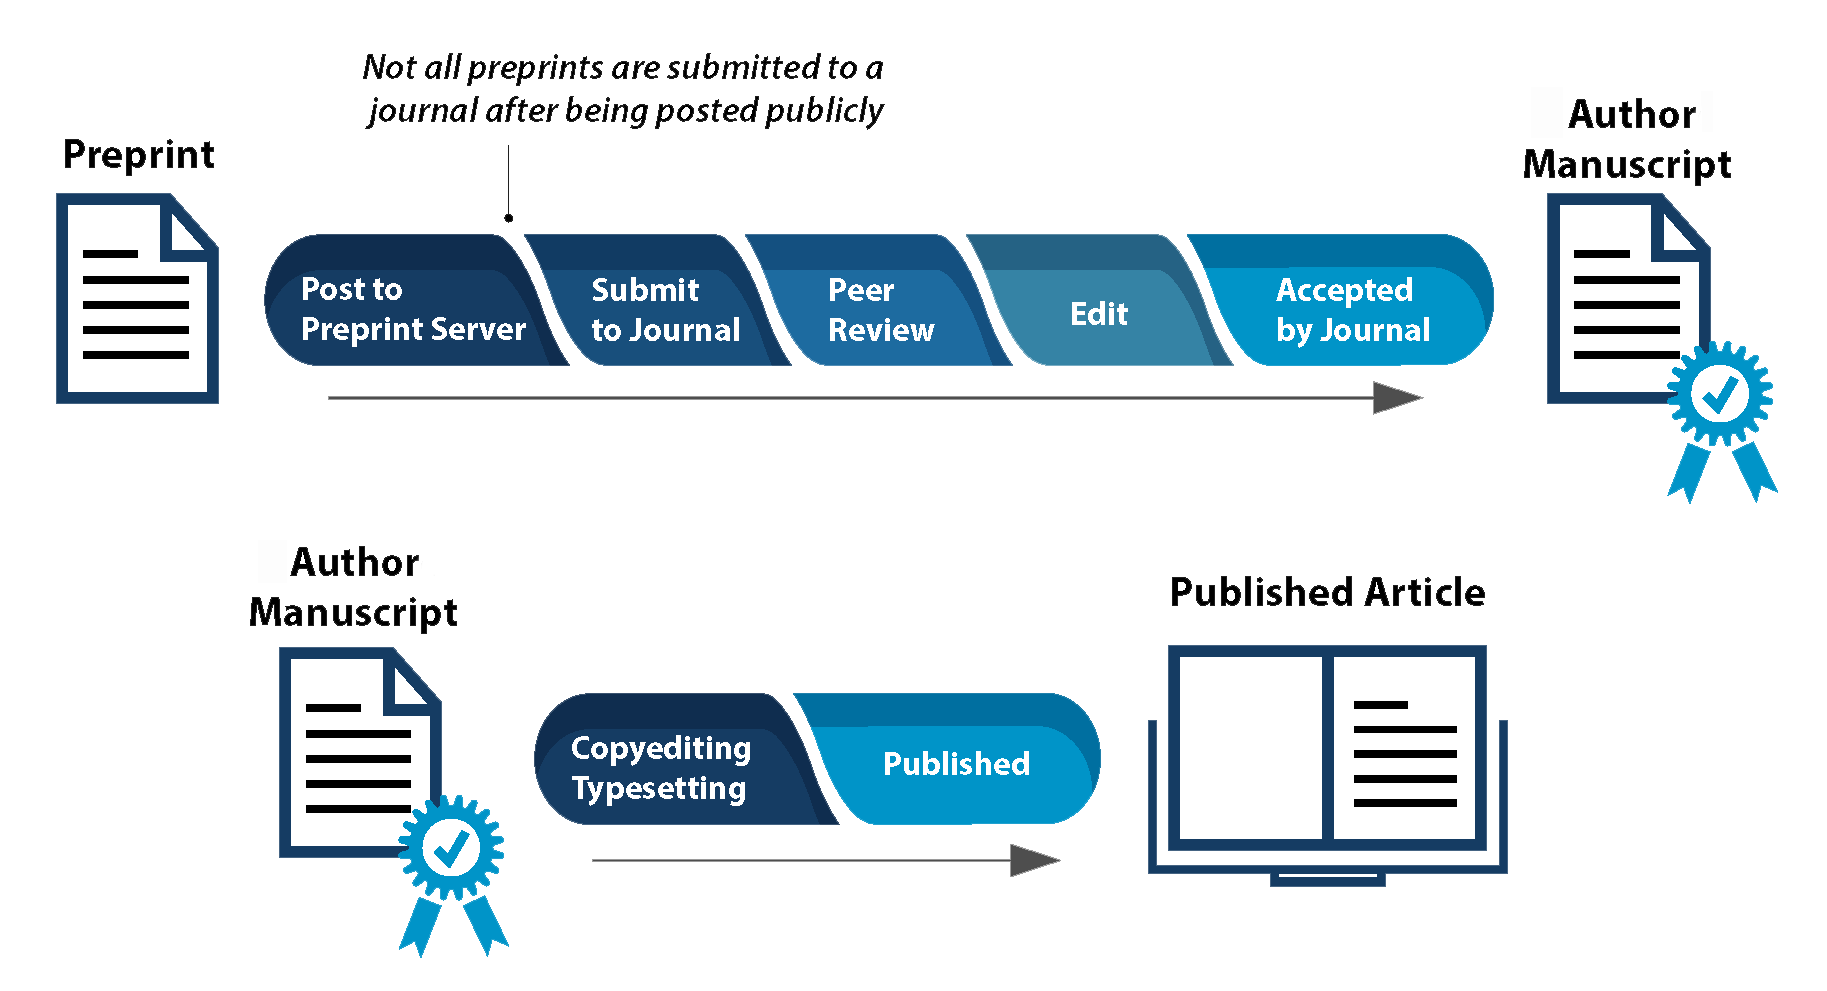 A paper's lifecycle from preprint to author manuscript to published article showing Preprint, Post to Preprint Server, Submit to Journal, Peer Review, Edit, Accepted By Journal, Author Manuscript, Copyediting Typesetting, Published Article